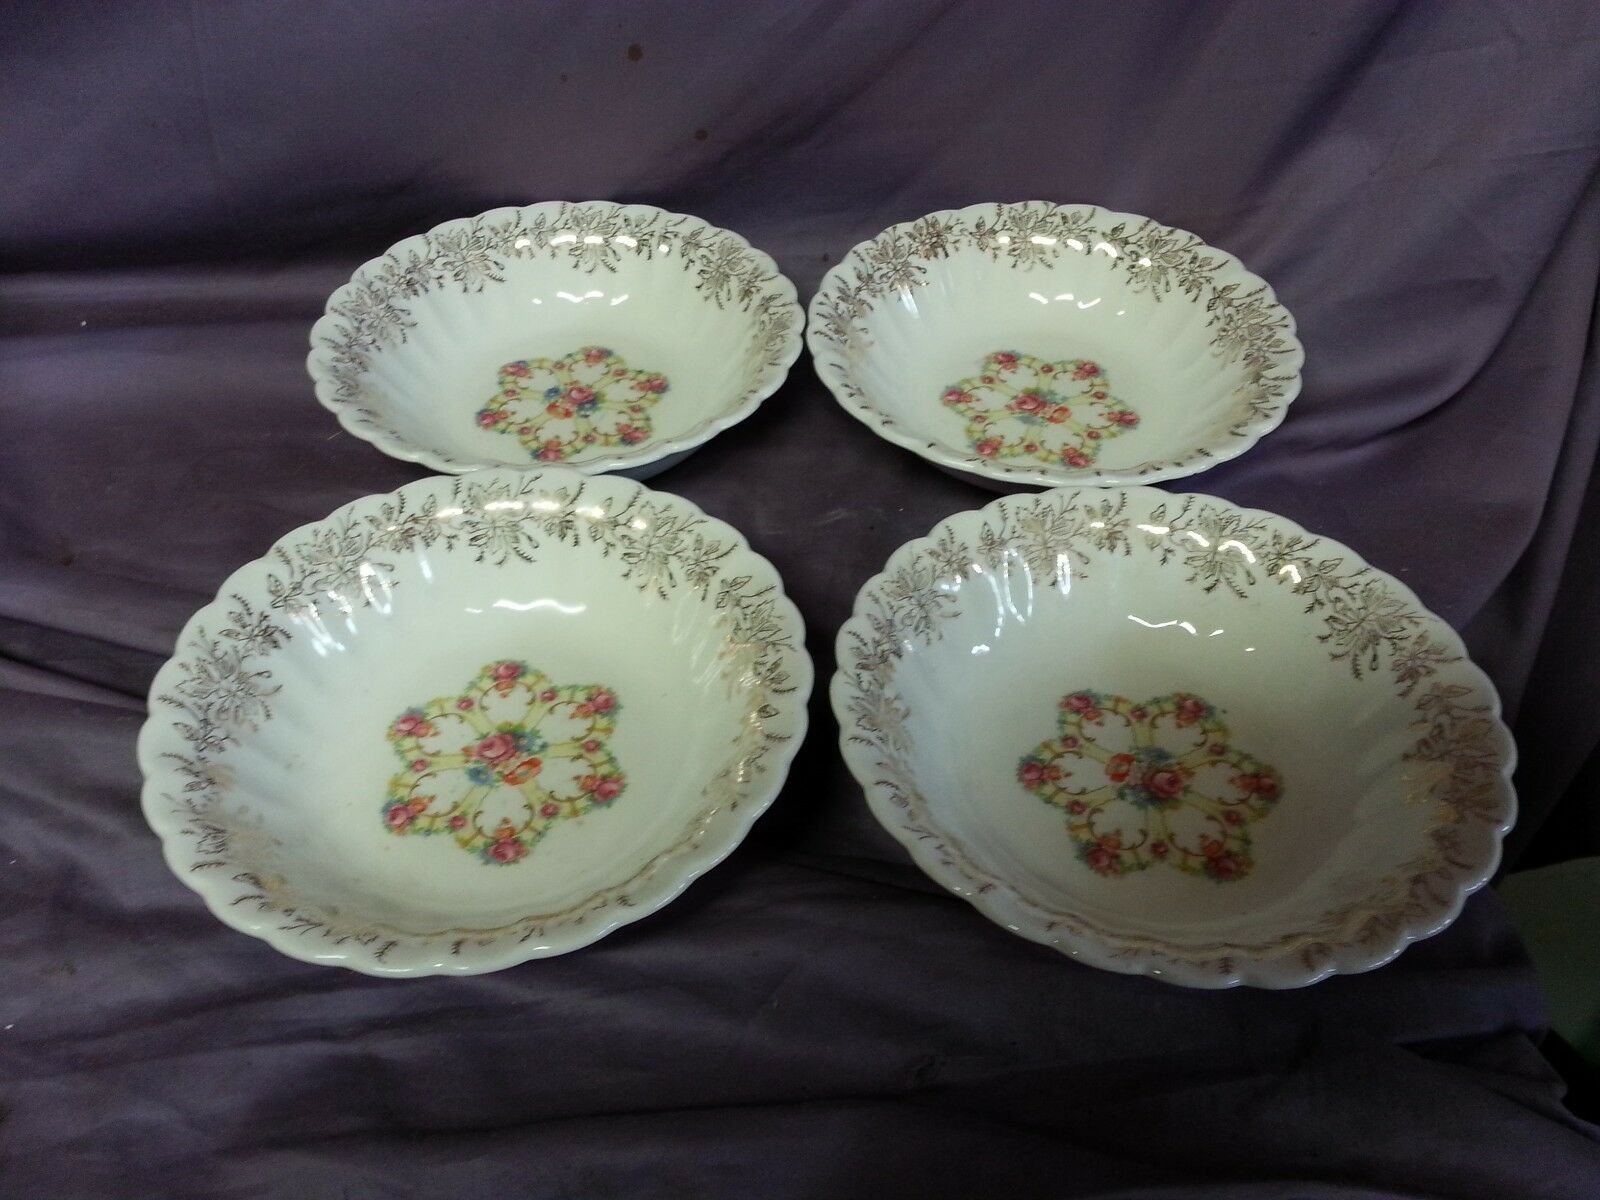 4 Antique Art Deco American Limoges Fortune Cereal Bowls  Itc-s264x 1947